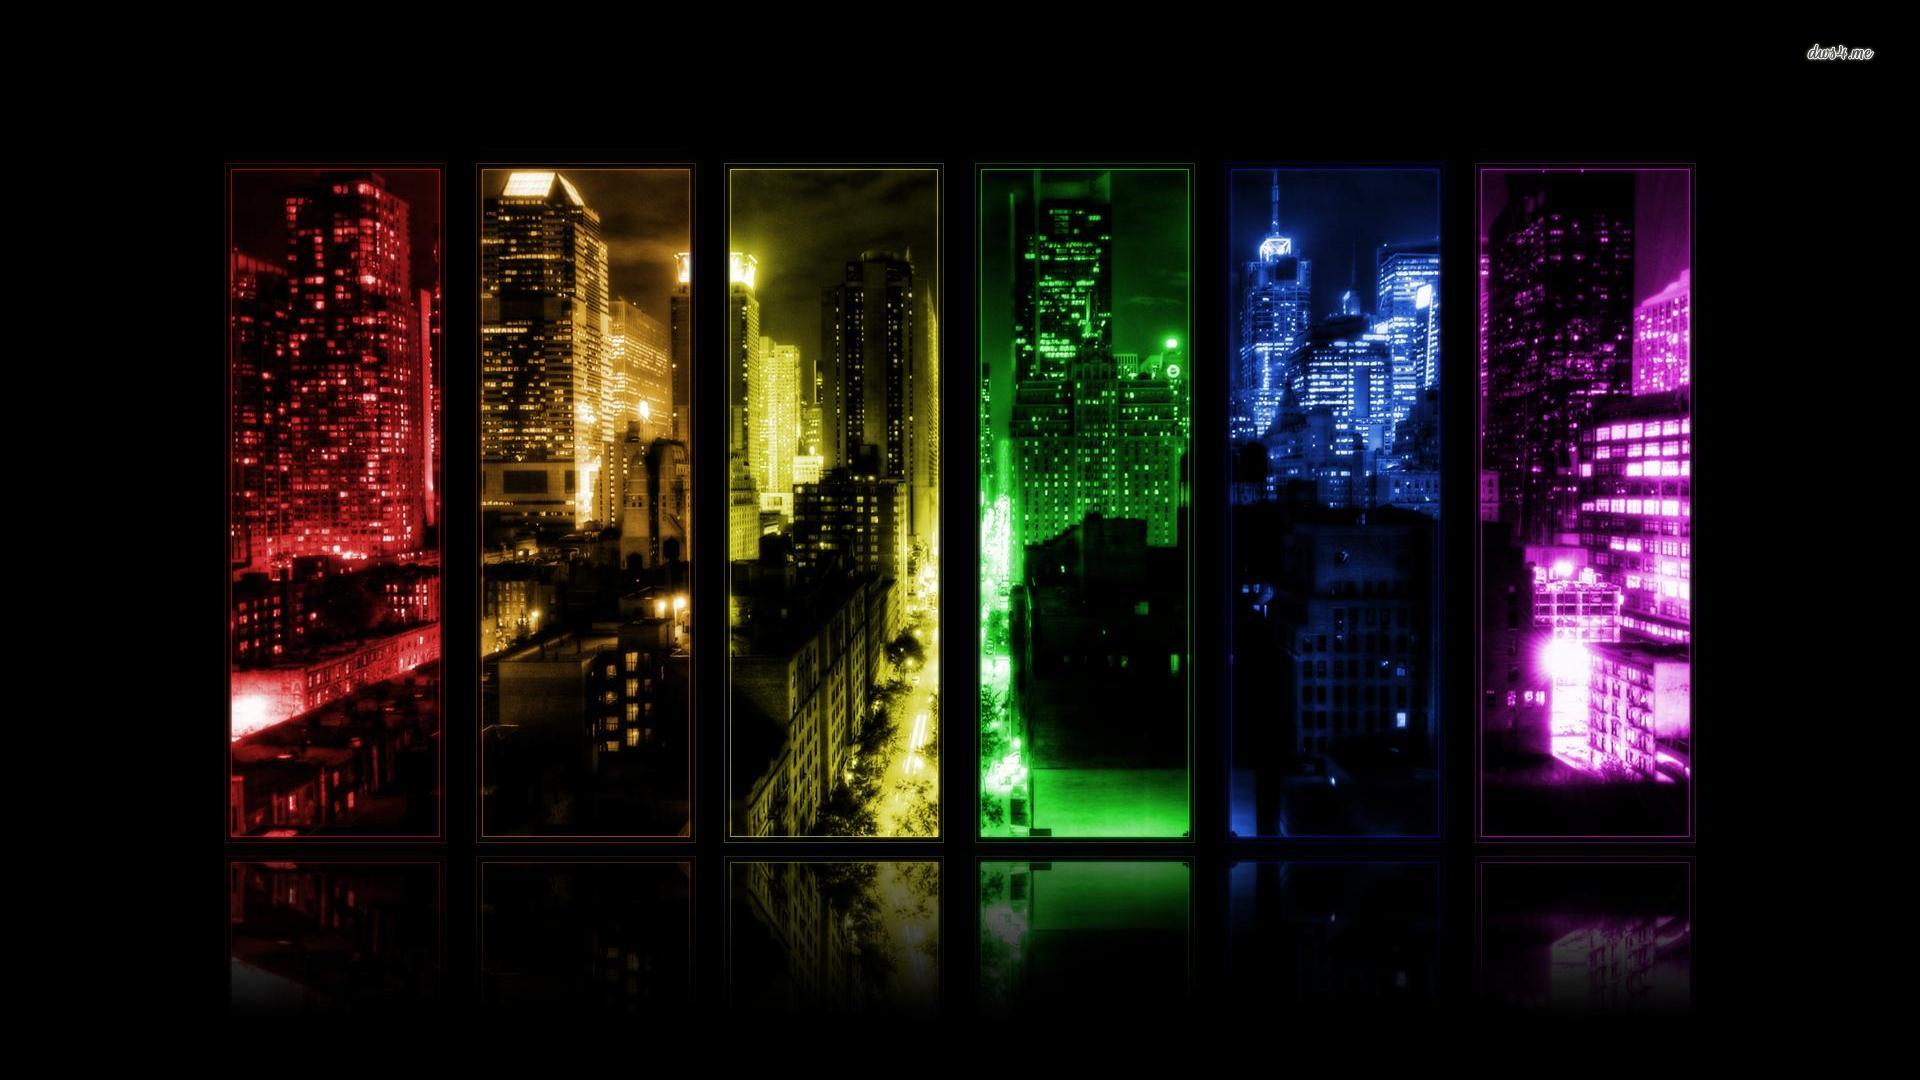 imagescicomimg201313abstract city lights 3618 hd wallpapersjpg